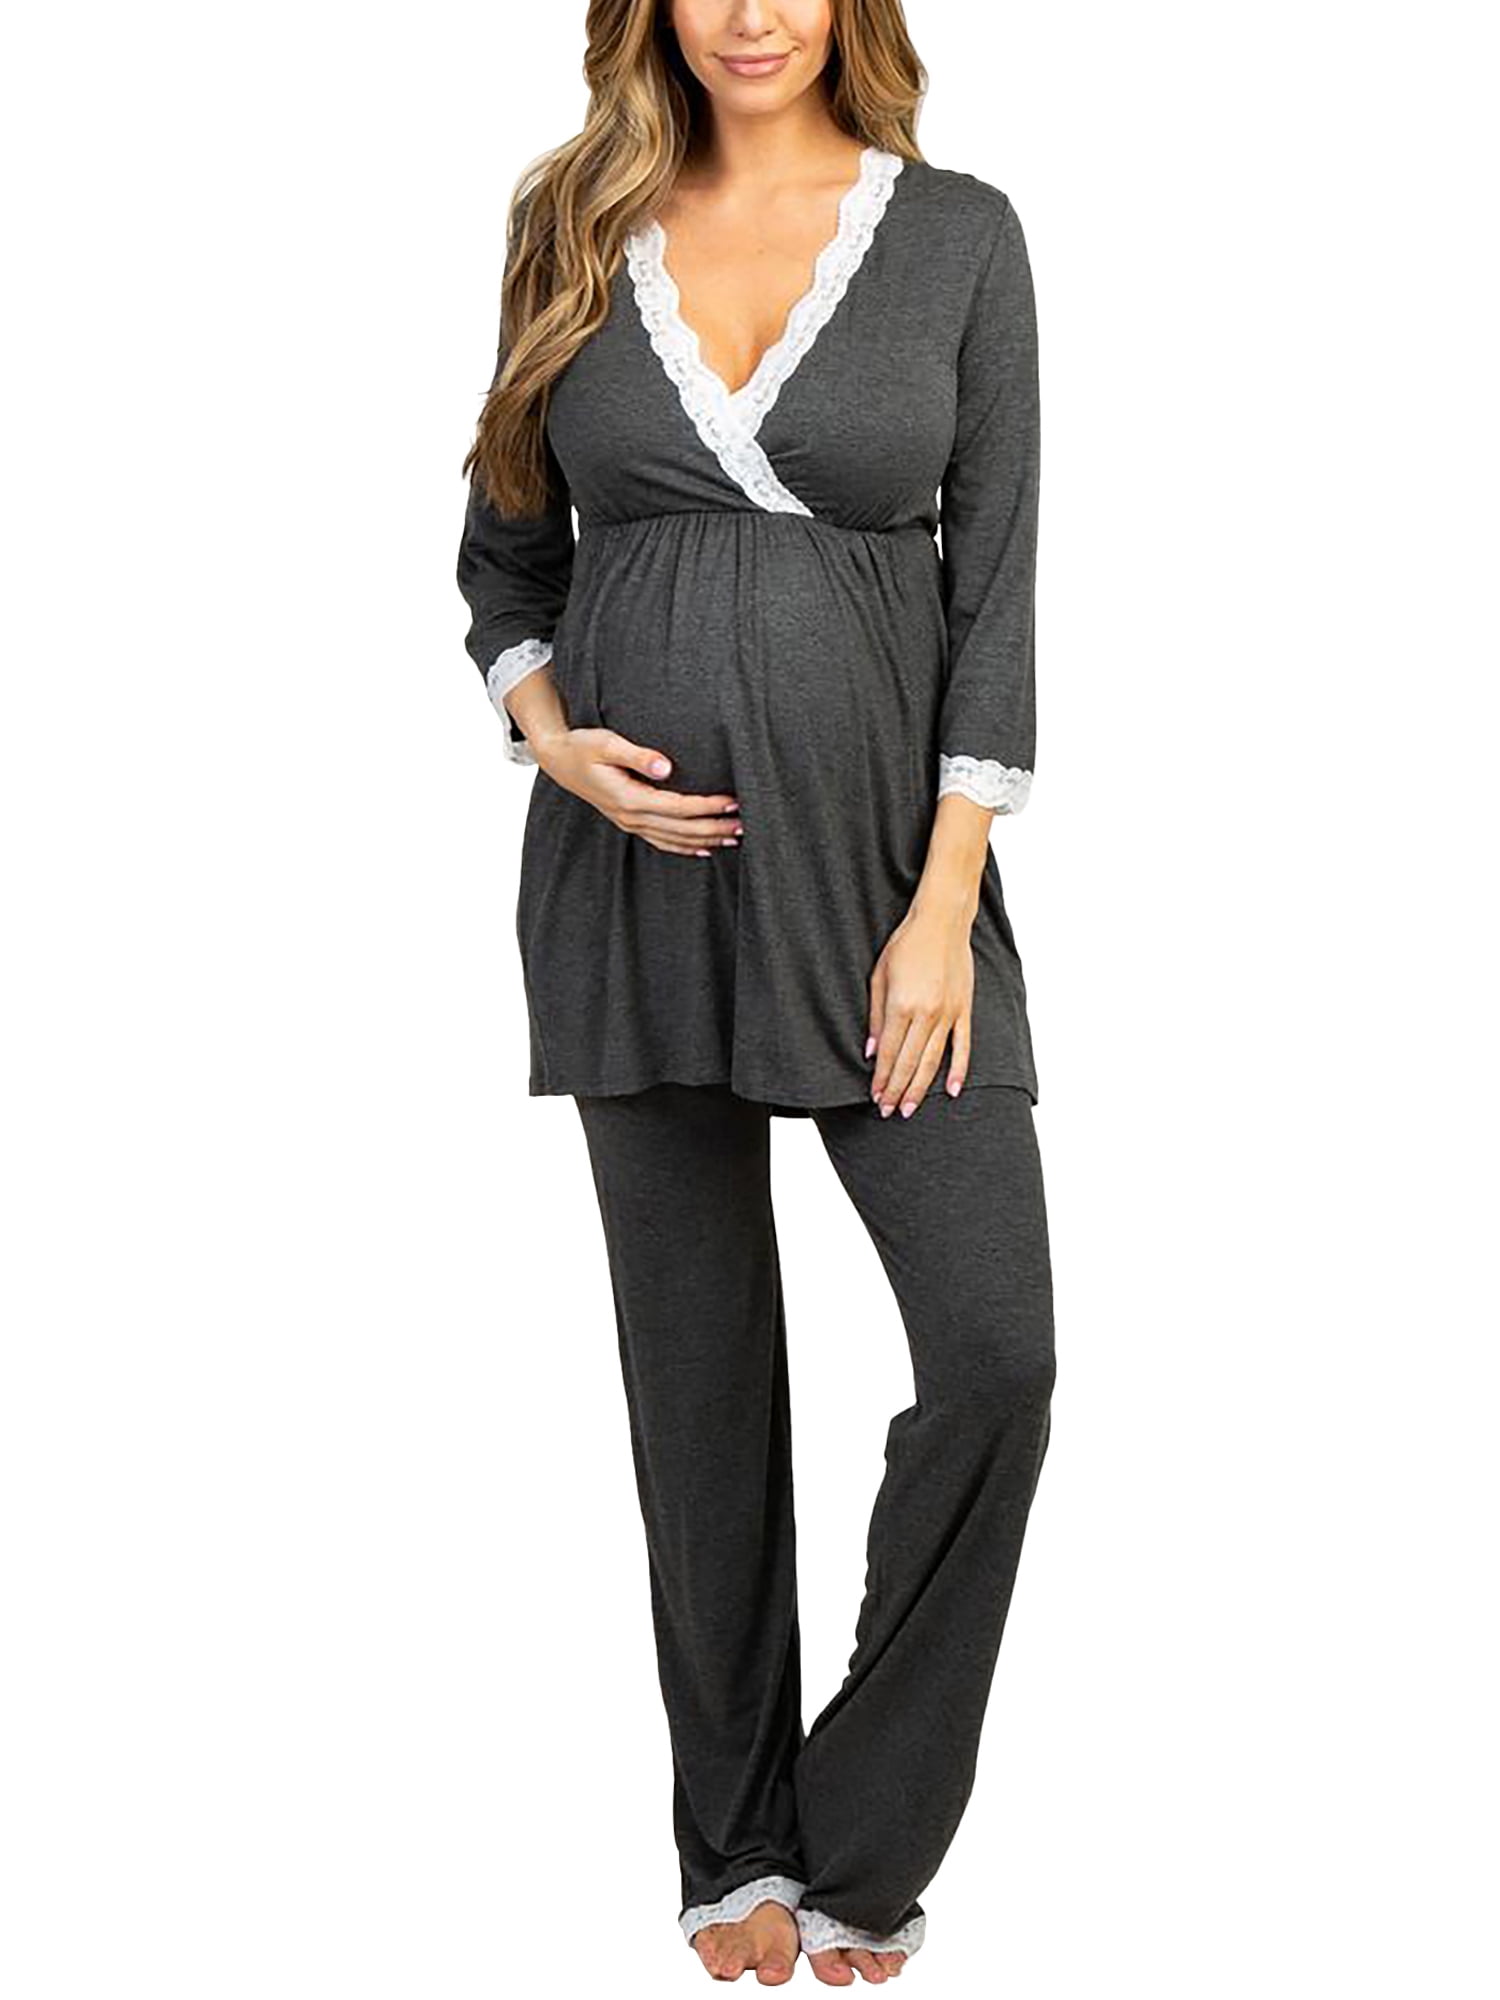 Womens Cotton Maternity Pregnancy Soft Nursing Pajama Sets Sleepwear Long  Sleeves for delivery Breastfeeding in Hospital